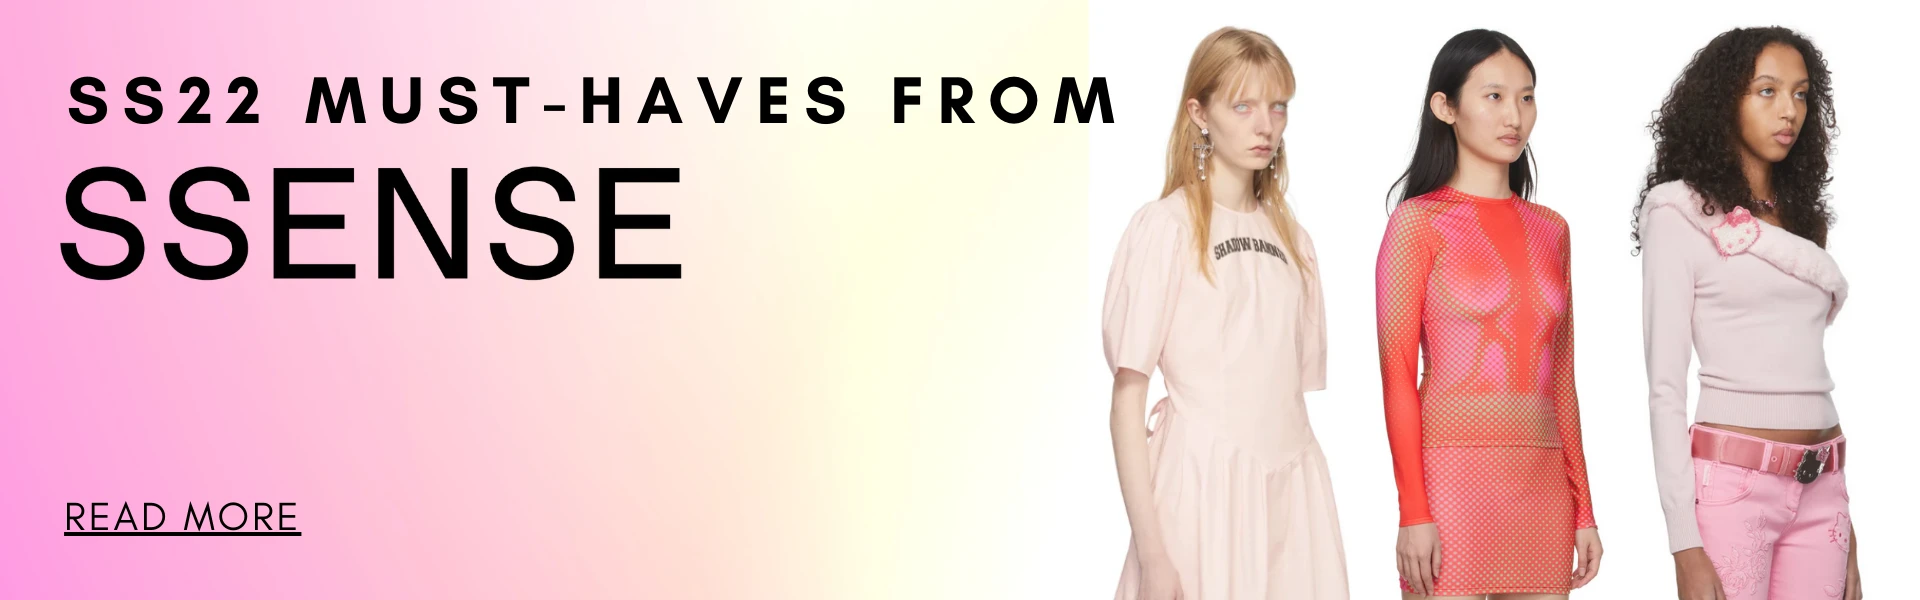 SSense Womens Must Haves